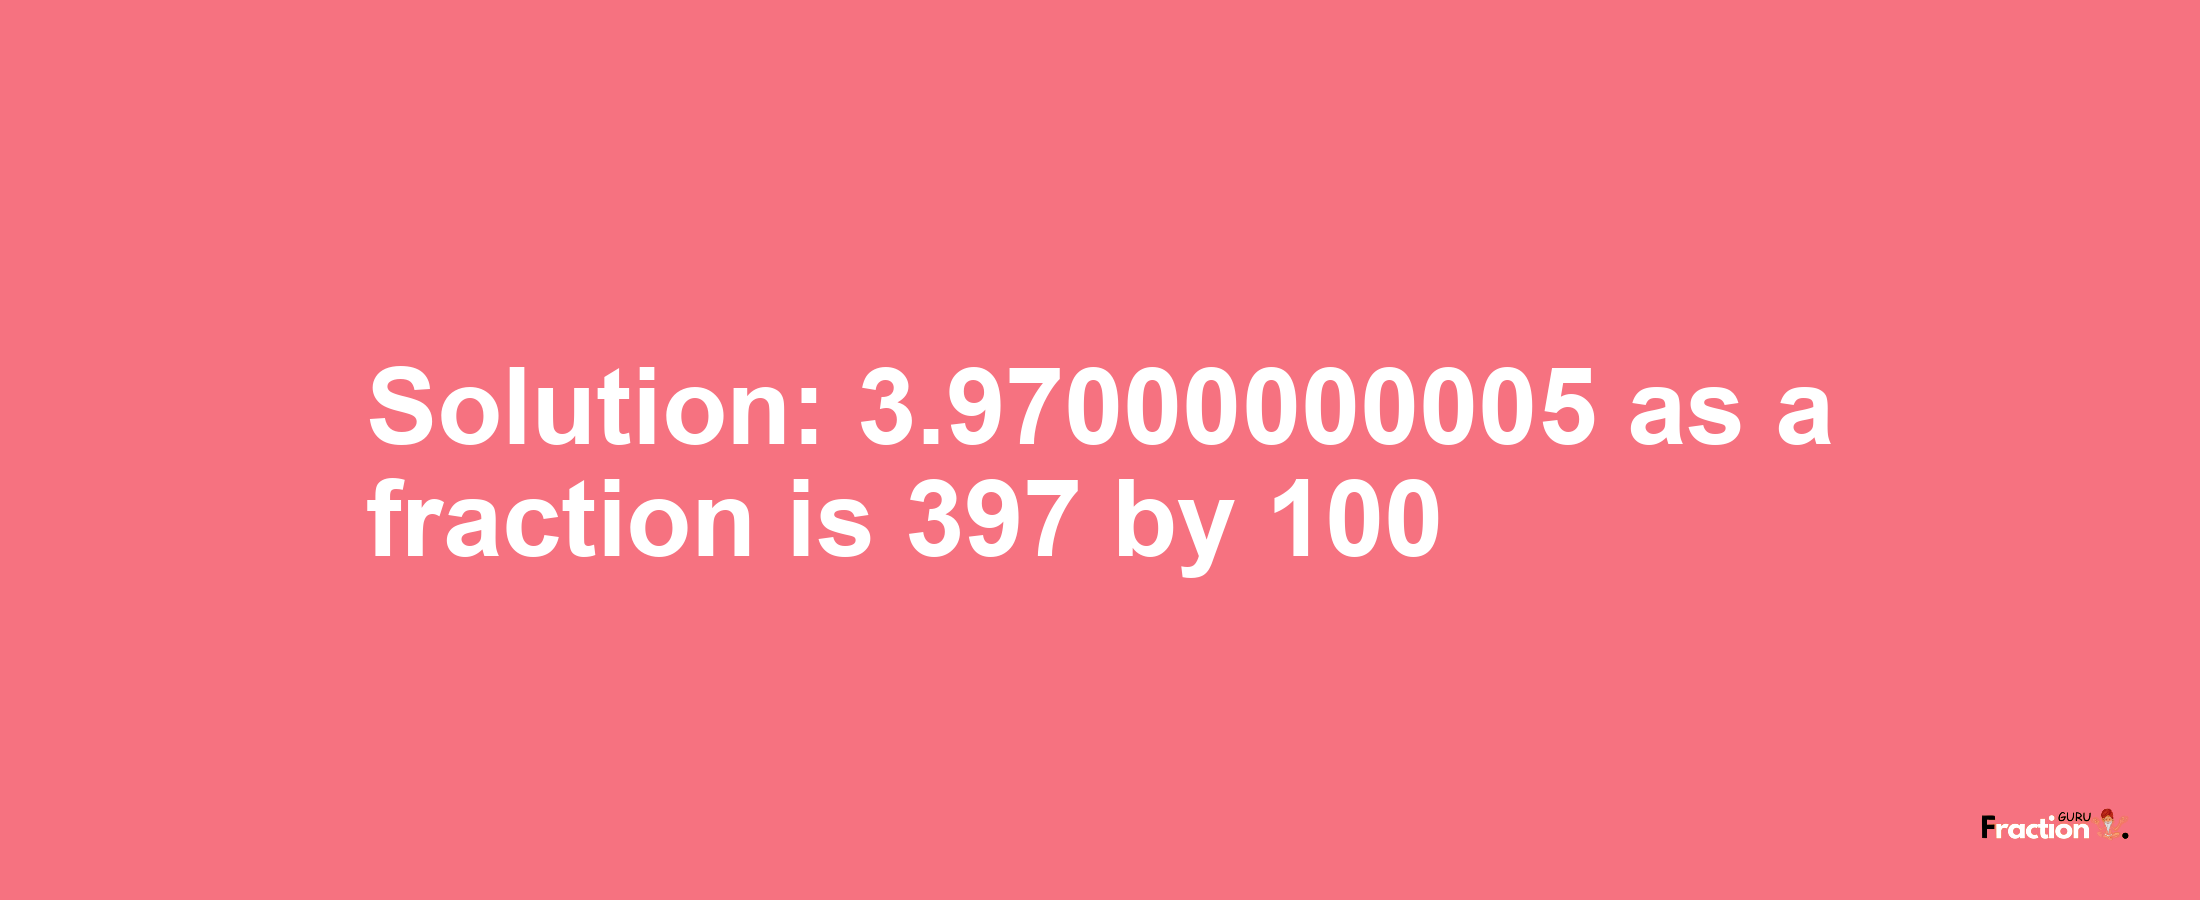 Solution:3.97000000005 as a fraction is 397/100